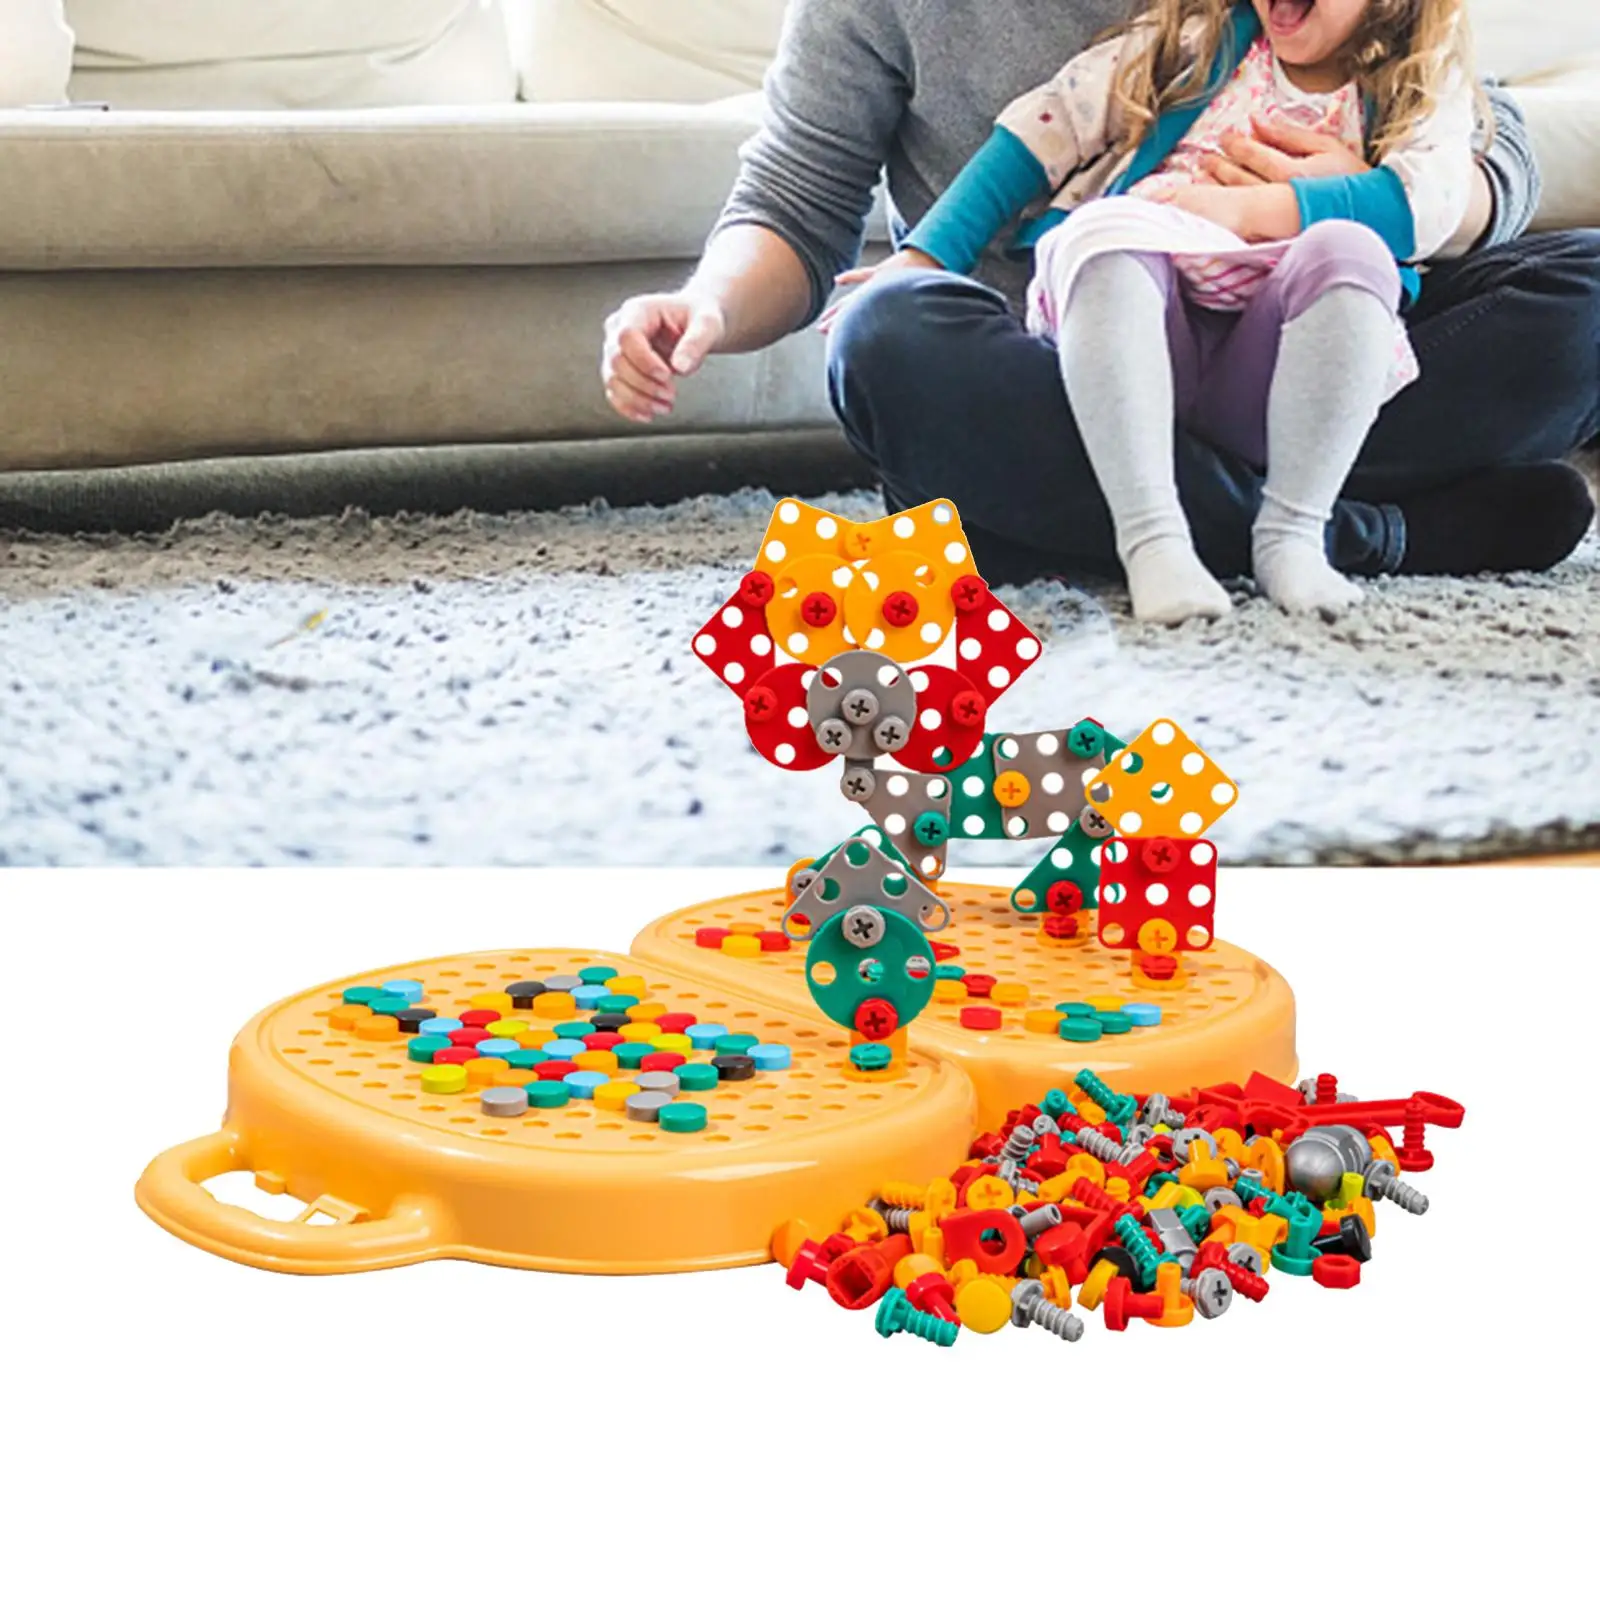 Simulation Building Toys Puzzle Toys Building Blocks Set Games Activity Center DIY Assembly Screw Toy for Children Gifts